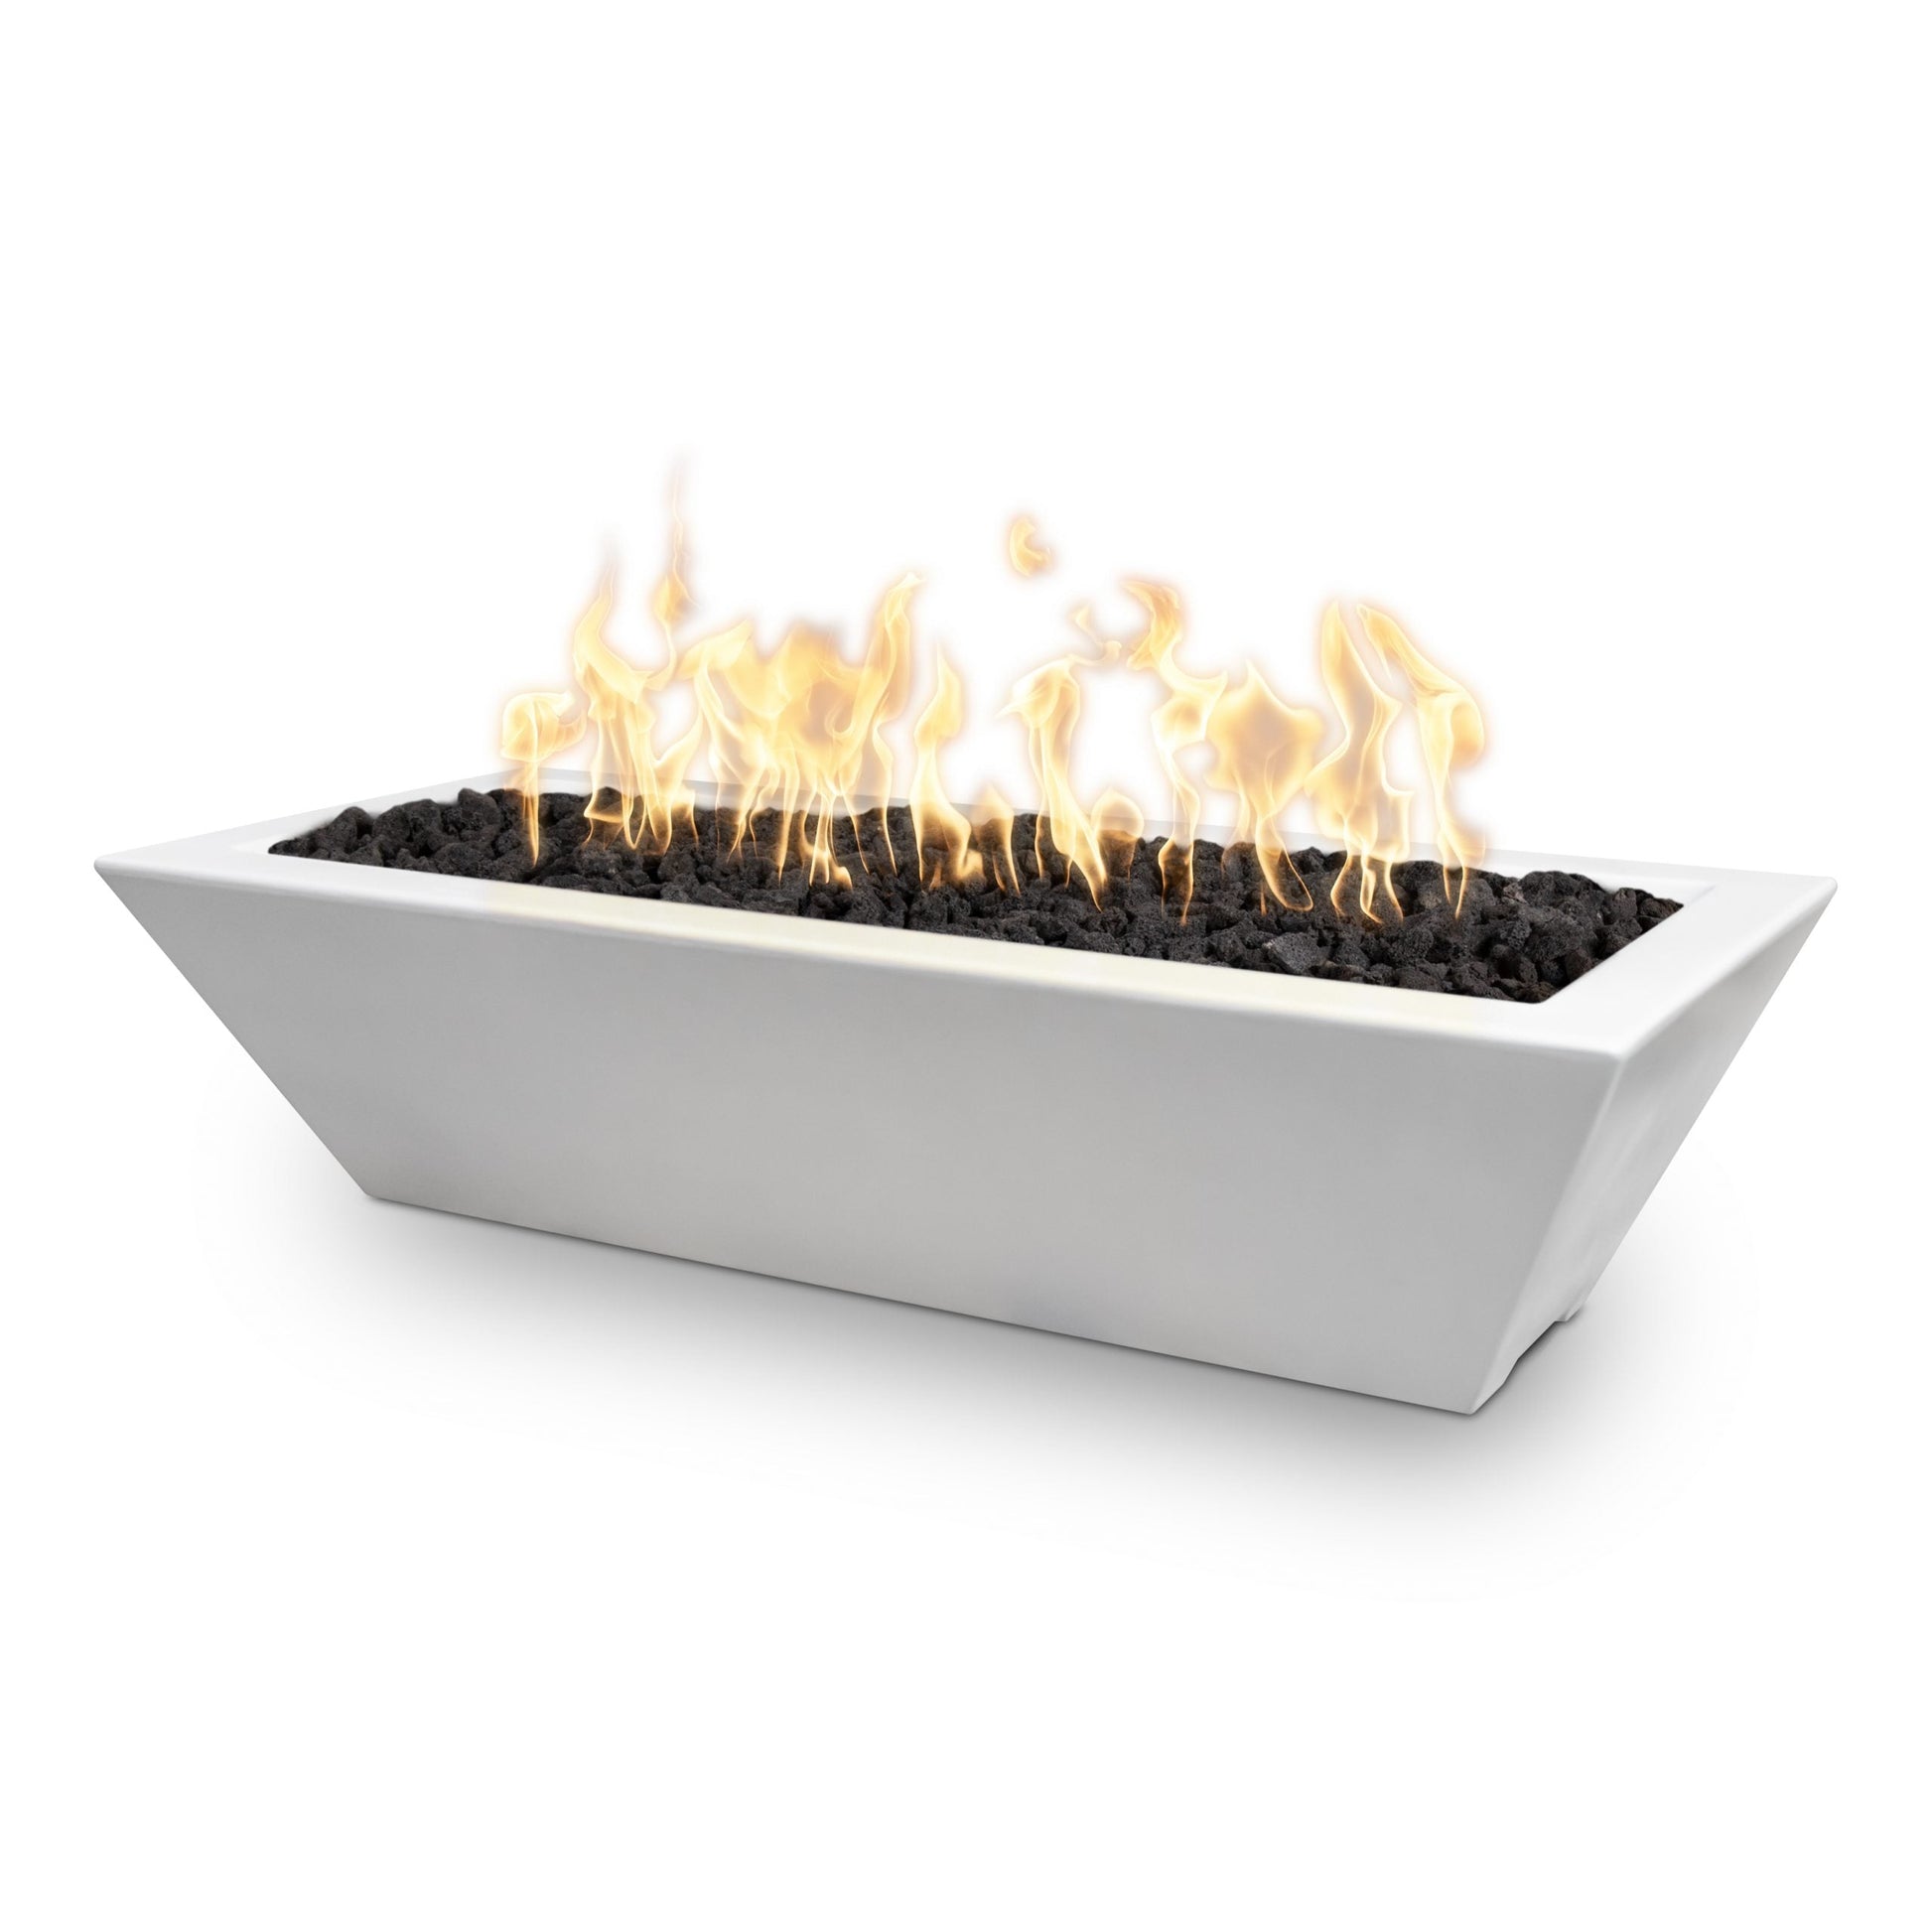 The Outdoor Plus Linear Maya 72" Metallic Silver GFRC Concrete Liquid Propane Fire Bowl with Match Lit Ignition